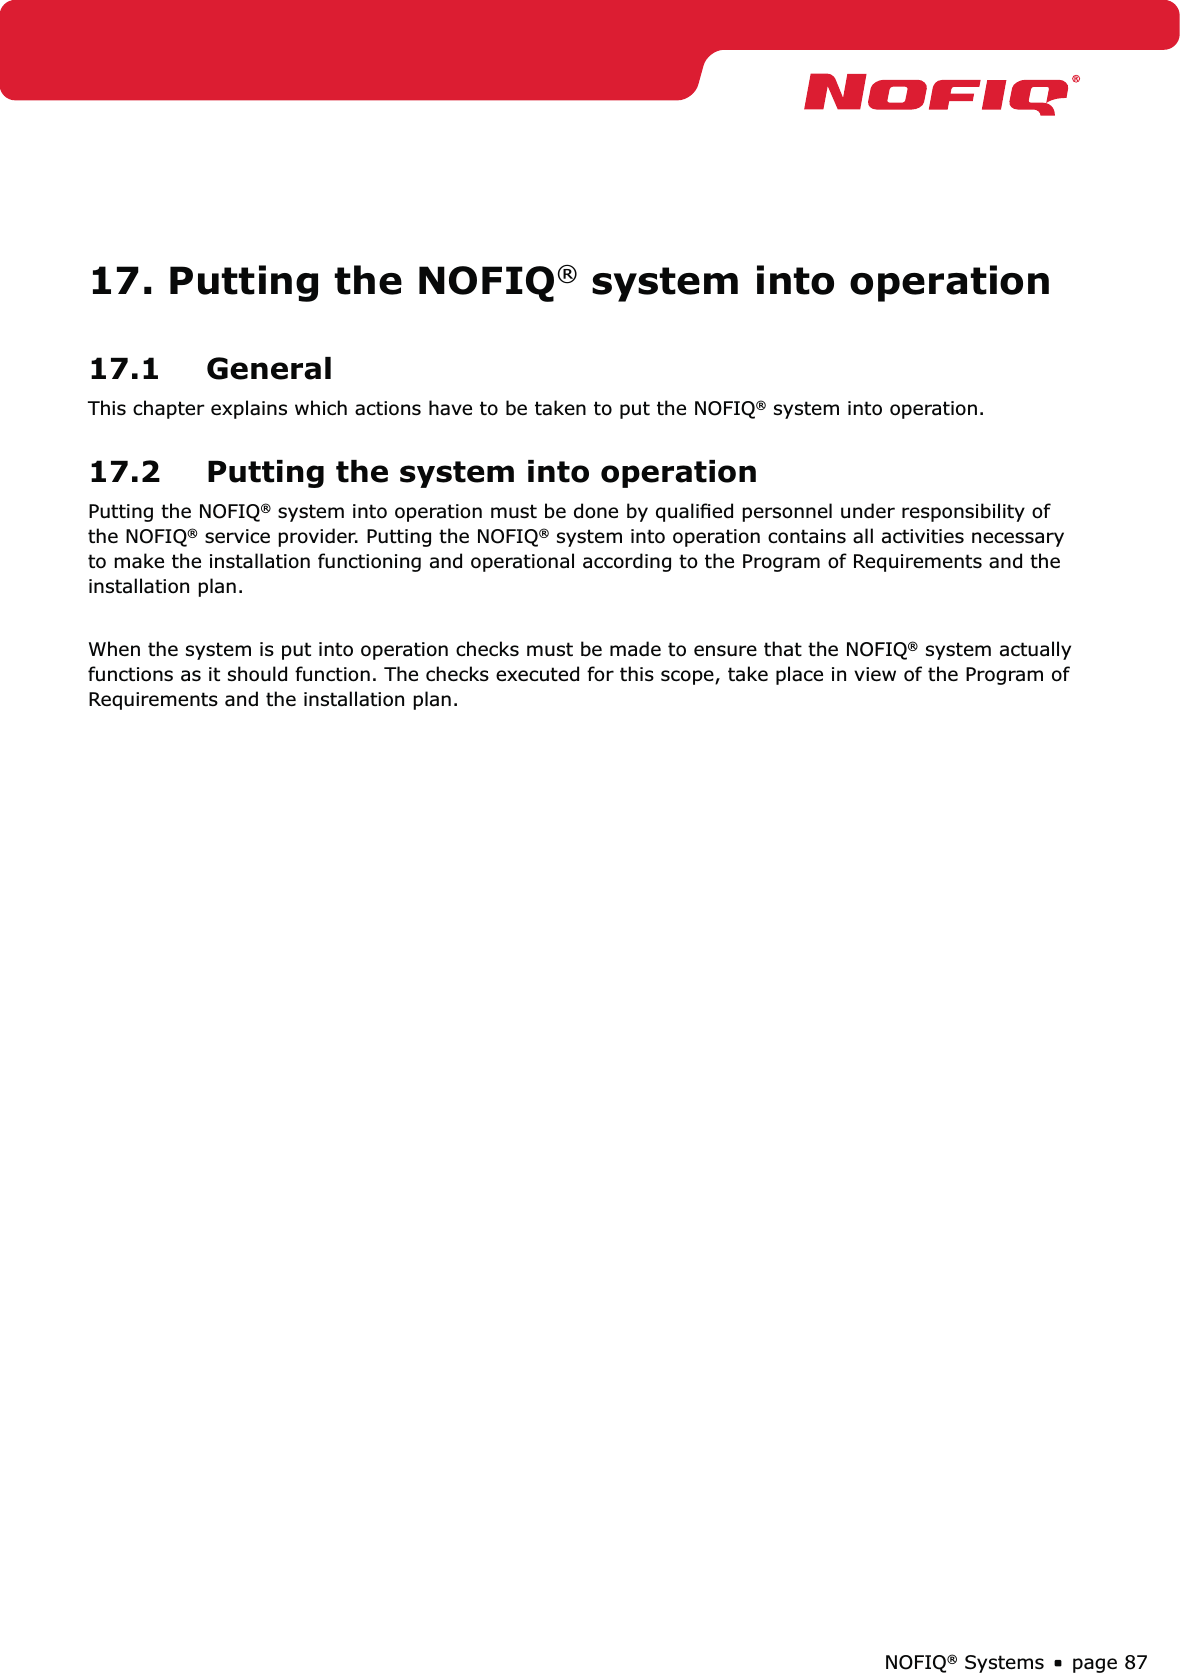 page 87NOFIQ® Systems17. Putting the NOFIQ® system into operation17.1 GeneralThis chapter explains which actions have to be taken to put the NOFIQ® system into operation.17.2  Putting the system into operationPutting the NOFIQ® system into operation must be done by qualiﬁed personnel under responsibility of the NOFIQ® service provider. Putting the NOFIQ® system into operation contains all activities necessary to make the installation functioning and operational according to the Program of Requirements and the installation plan.When the system is put into operation checks must be made to ensure that the NOFIQ® system actually functions as it should function. The checks executed for this scope, take place in view of the Program of Requirements and the installation plan.